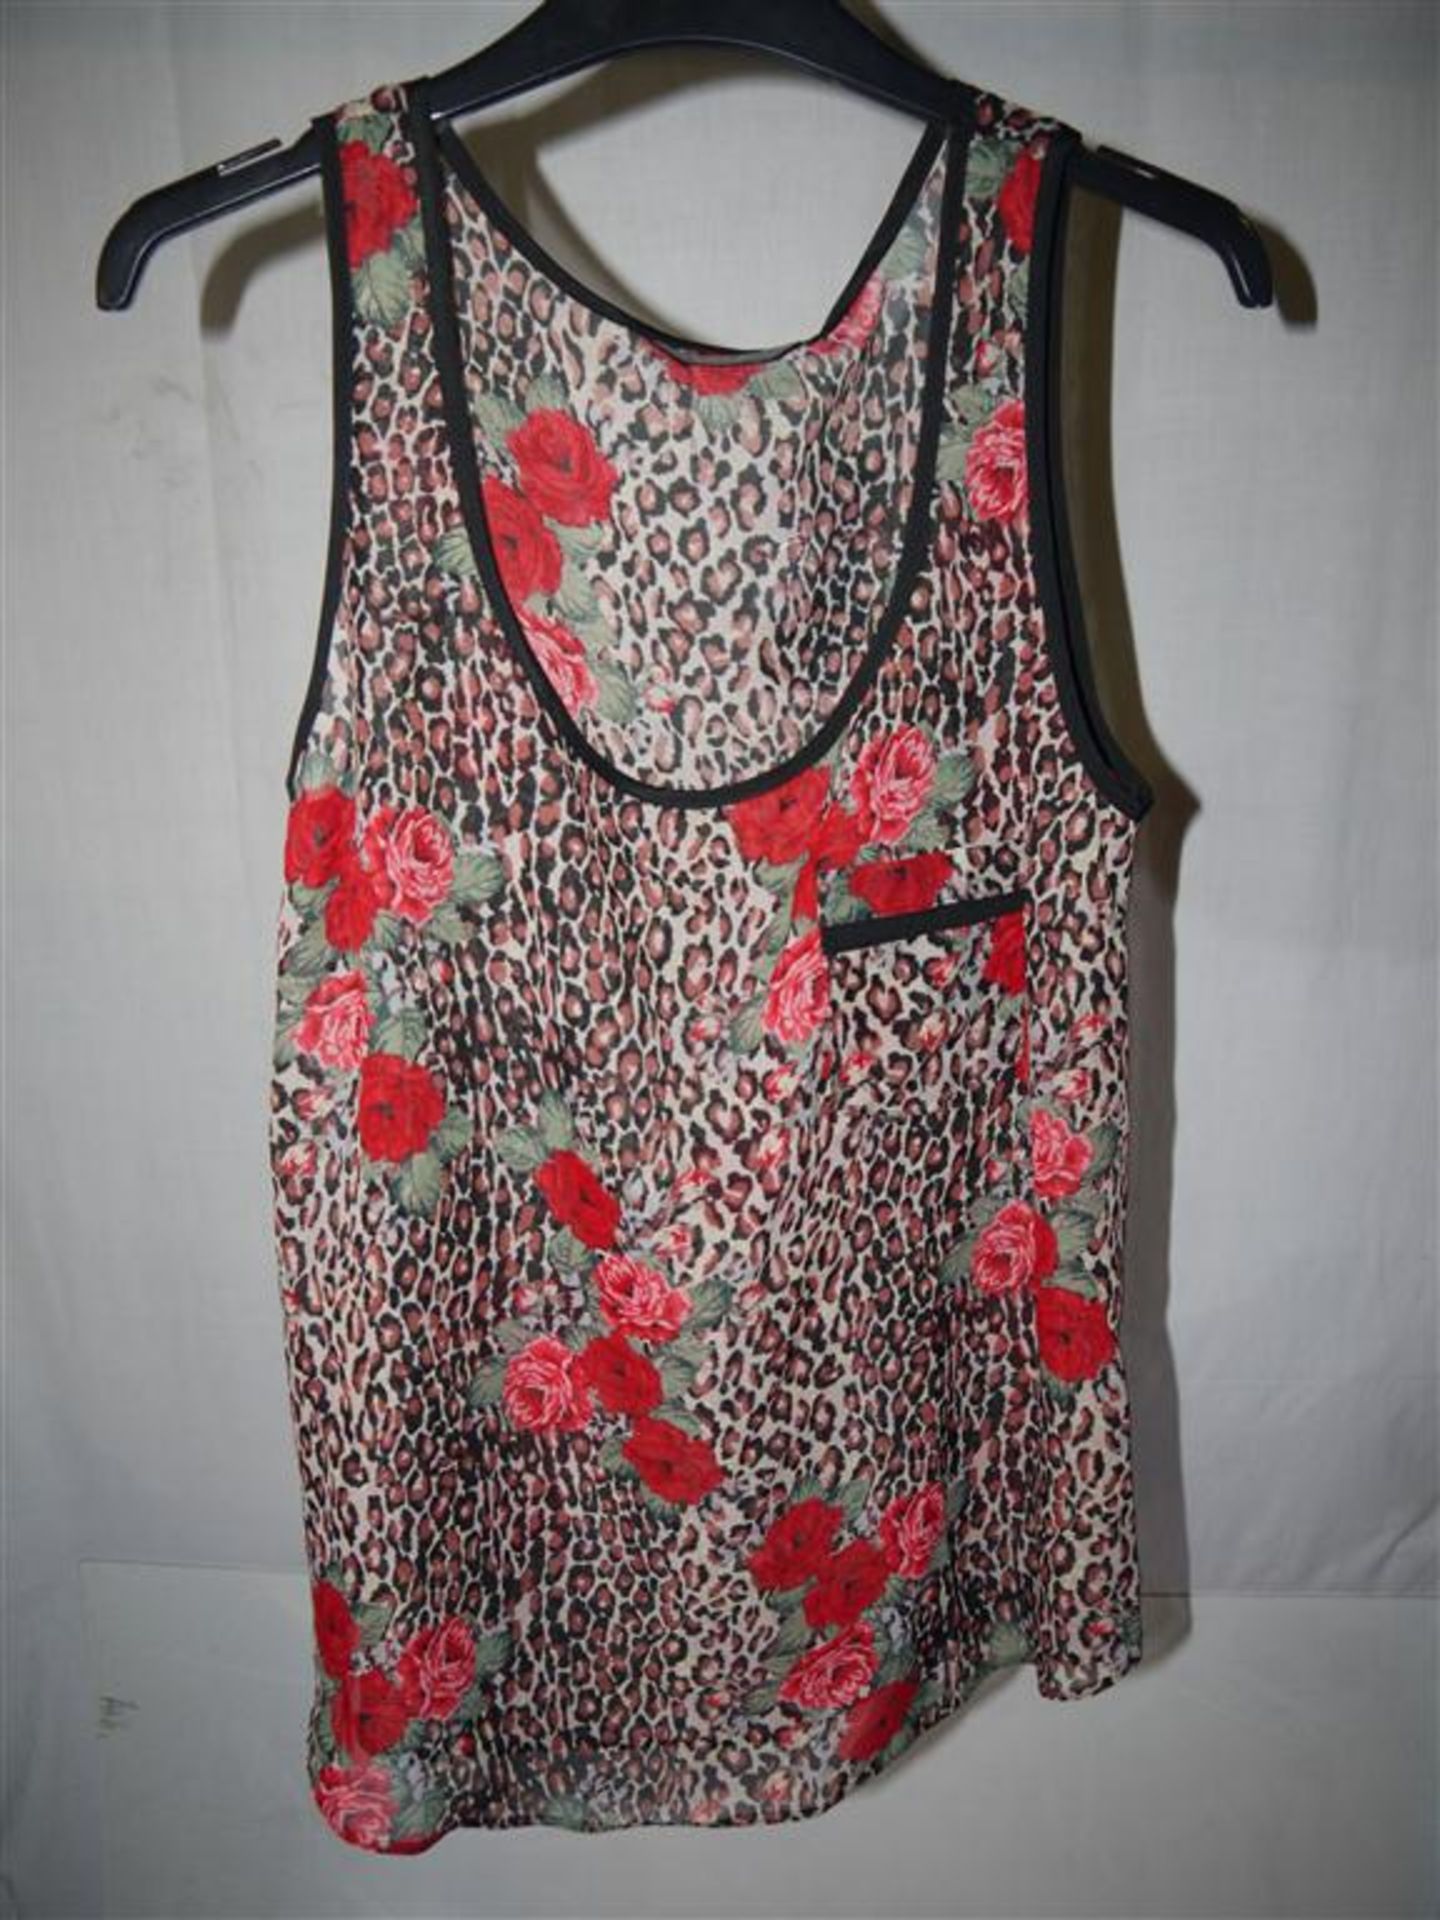 105 x Items Of Assorted Women's Clothing - Box399 - Tops, Pants, Vests, Bikinis - Sizes Range From - Image 15 of 15